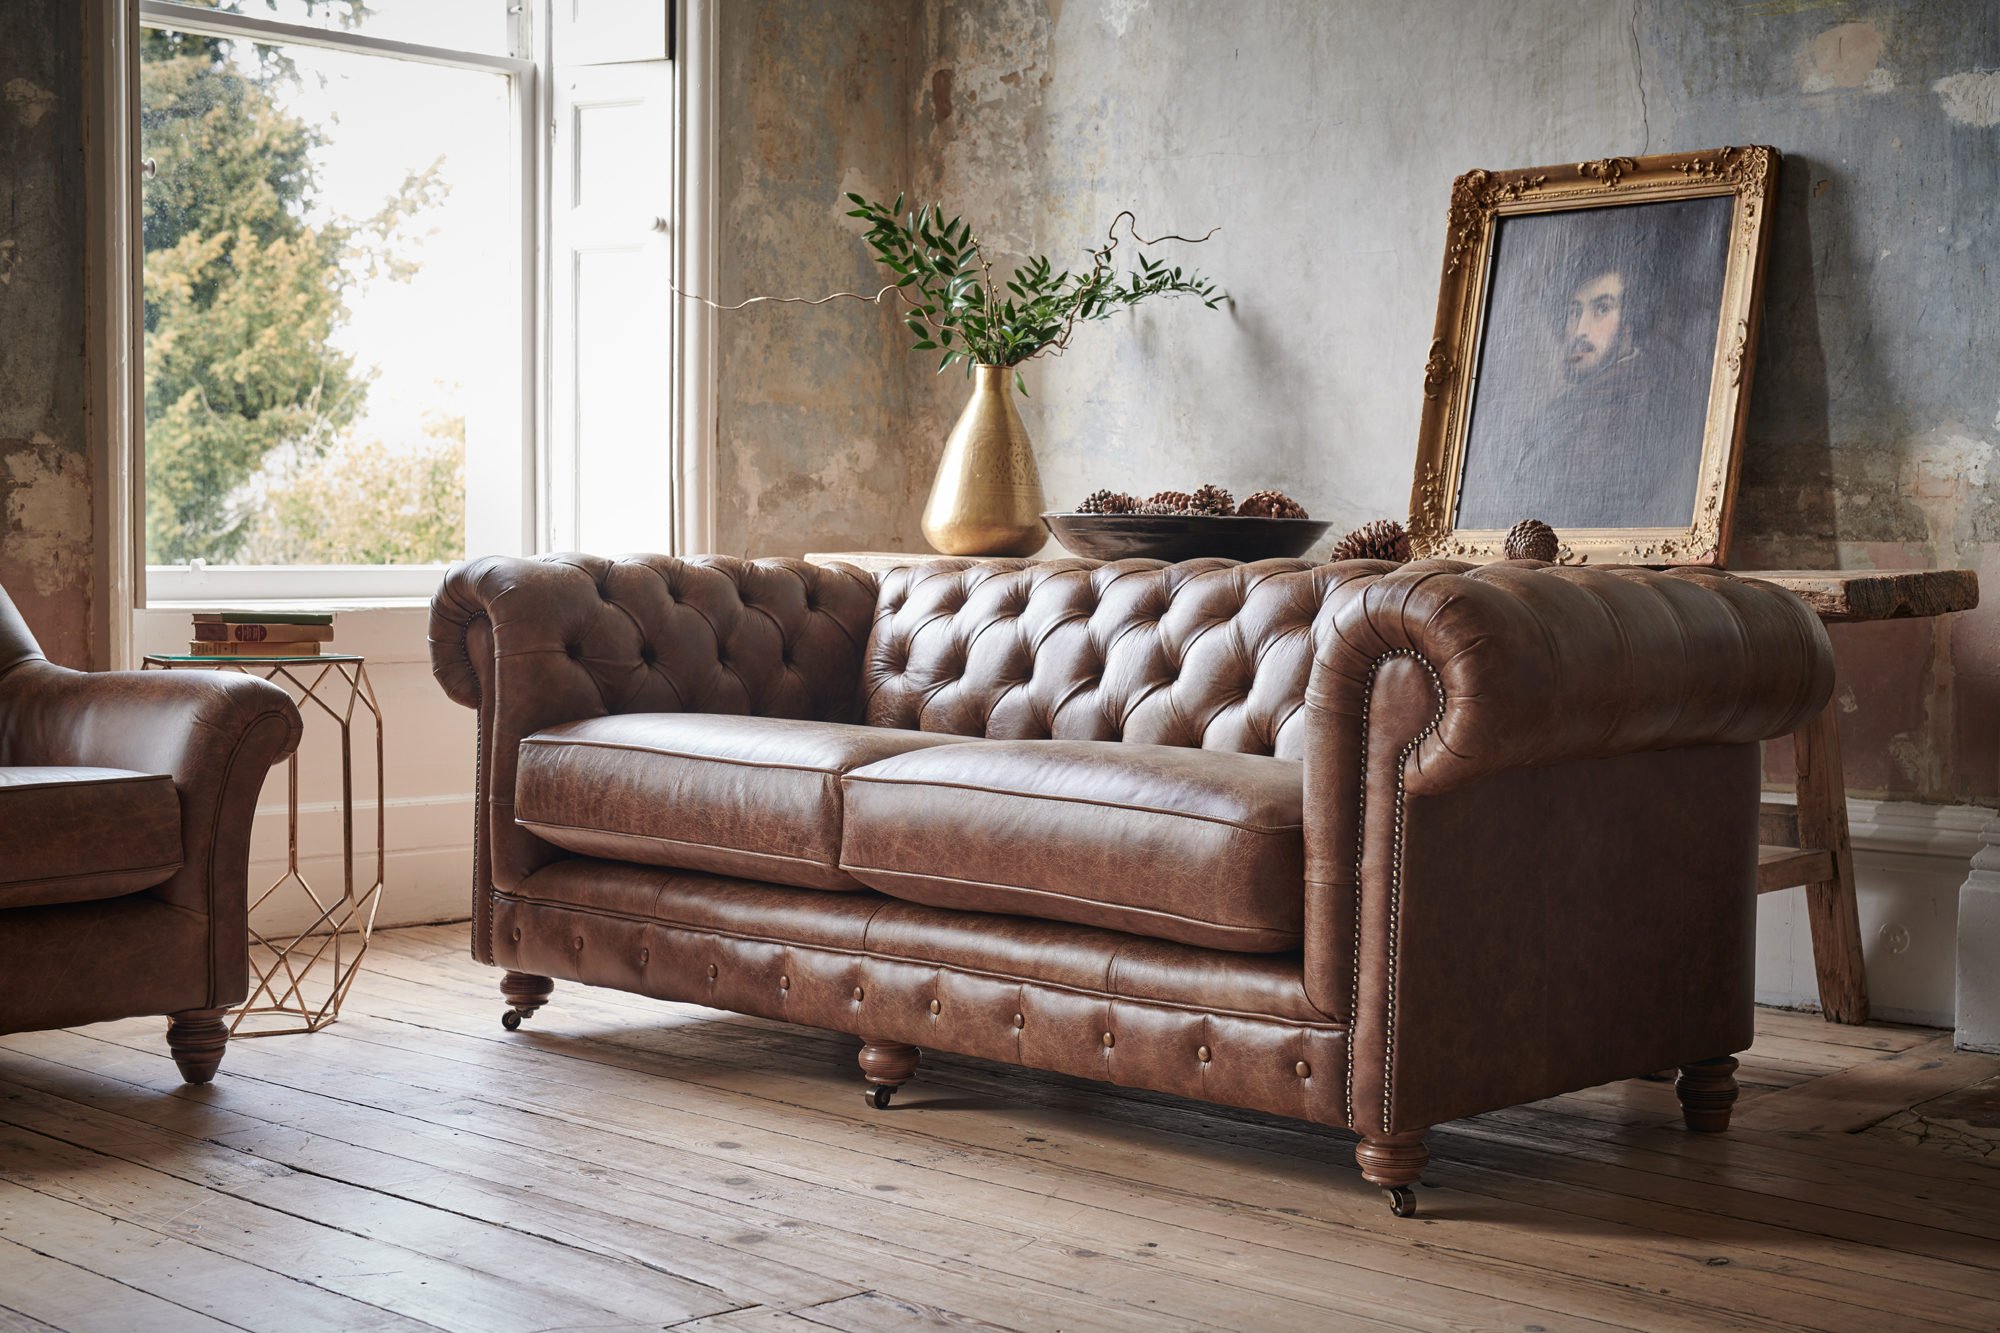 Chesterfield Leather Sofa, Traditional English Leather Sofas